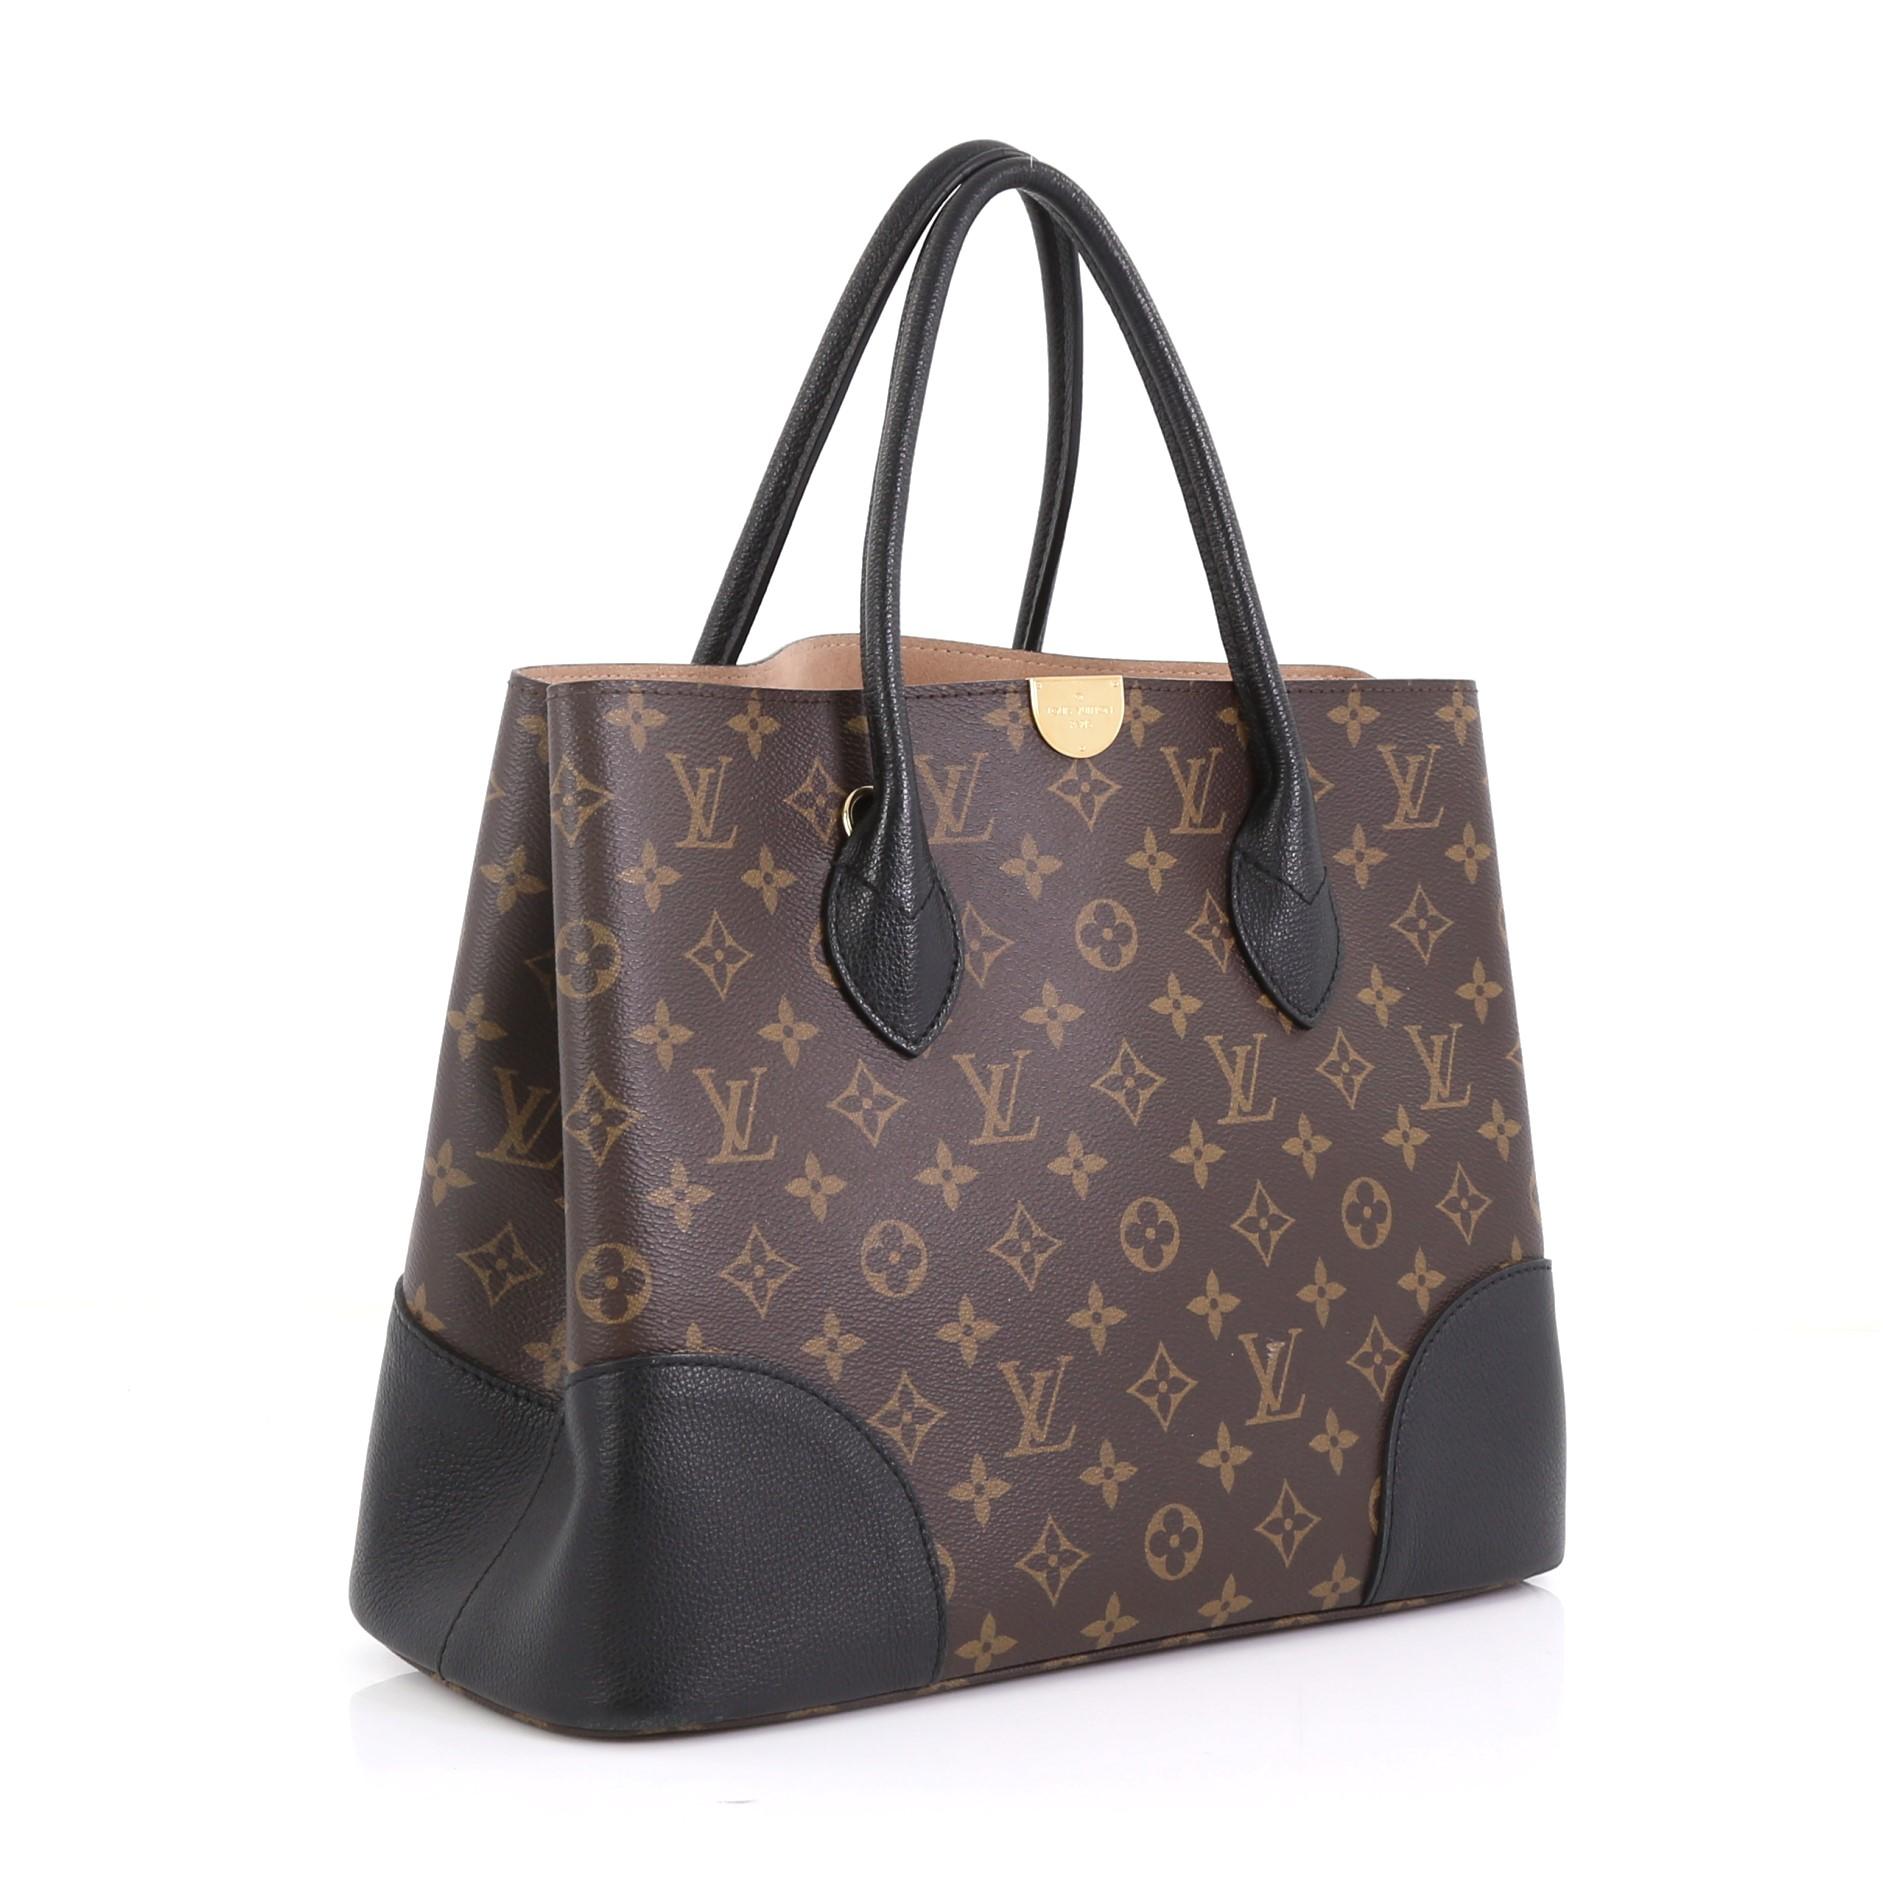 This Louis Vuitton Flandrin Handbag Monogram Canvas, crafted from brown monogram coated canvas and black leather, features dual rolled leather handles and gold-tone hardware. It opens to a nude microfiber interior with a center zip compartment.